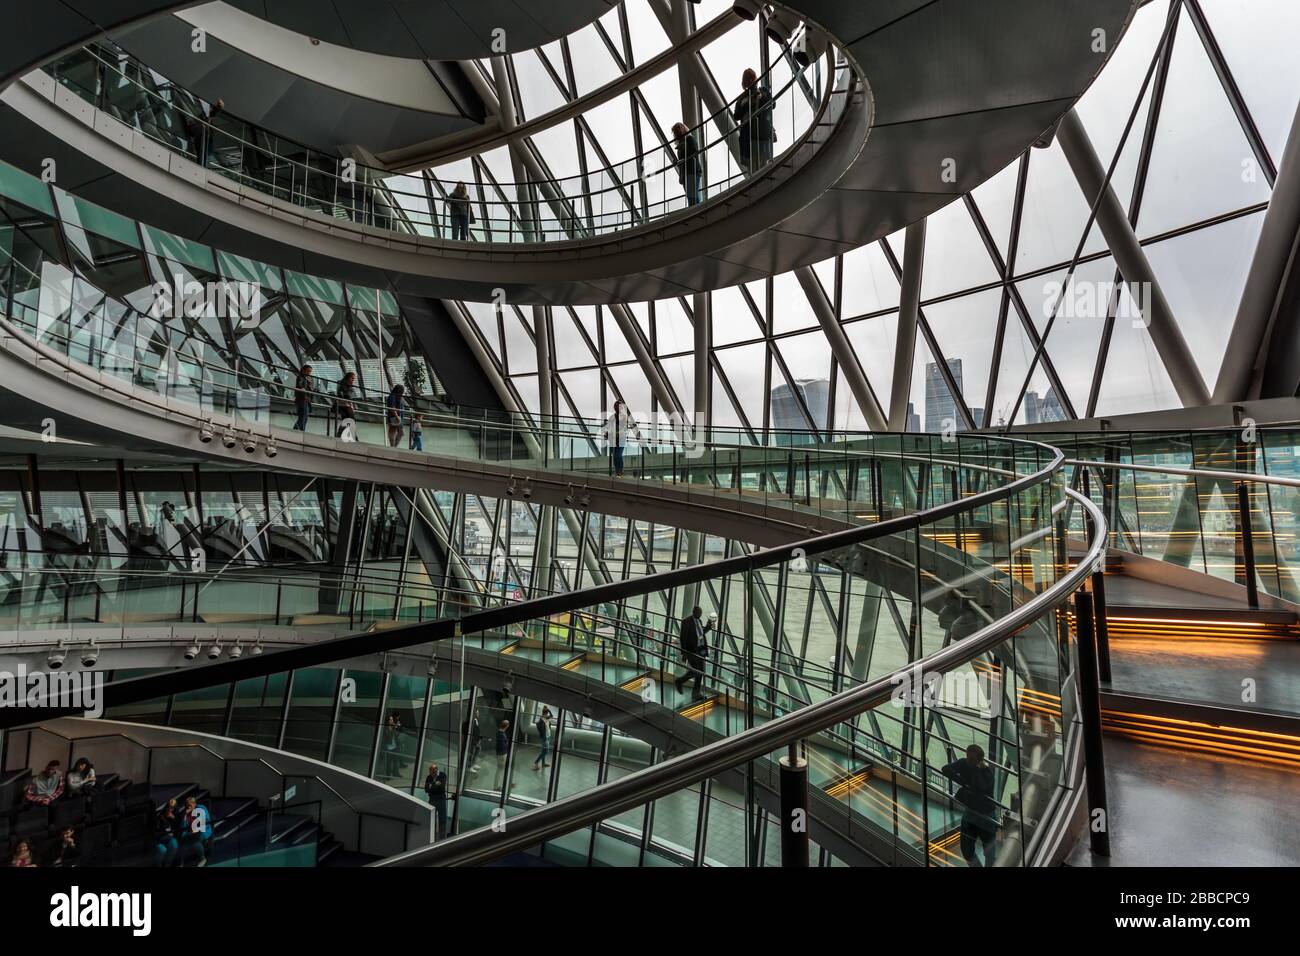 The interior staircase at City Hall, Southwark, which is the headquarters of the Greater London Authority, London Stock Photo